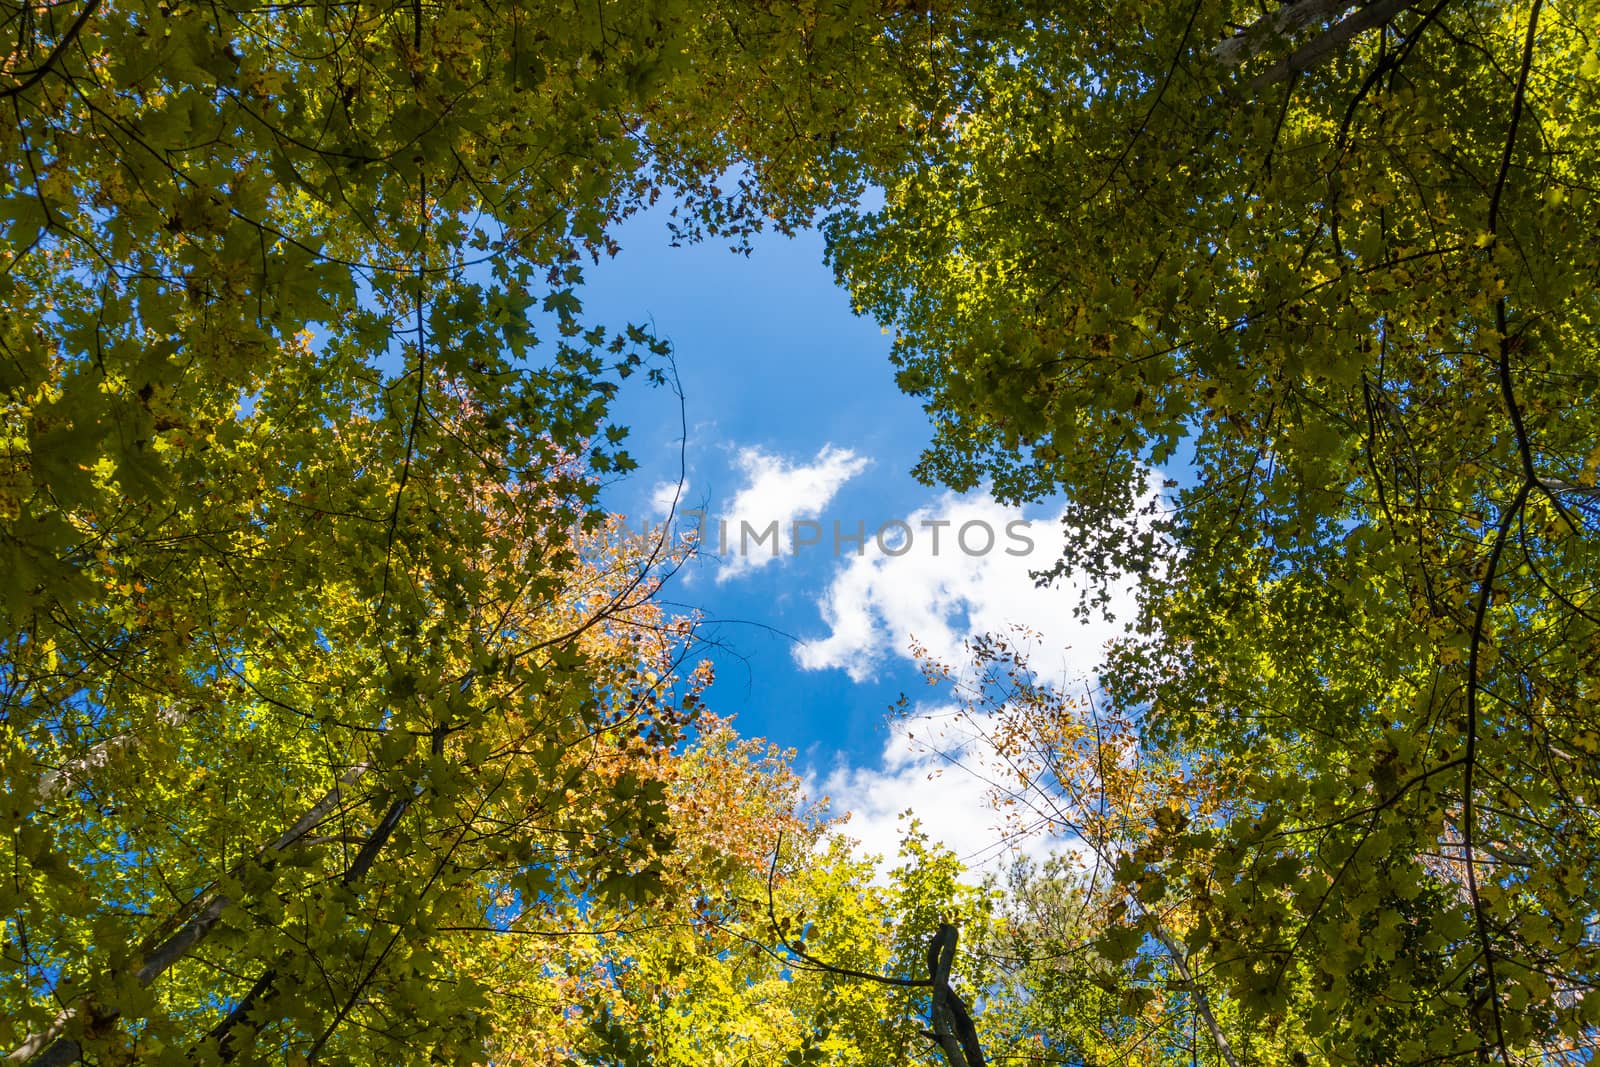 Photo of the sky with white clouds floating through autumn foliage